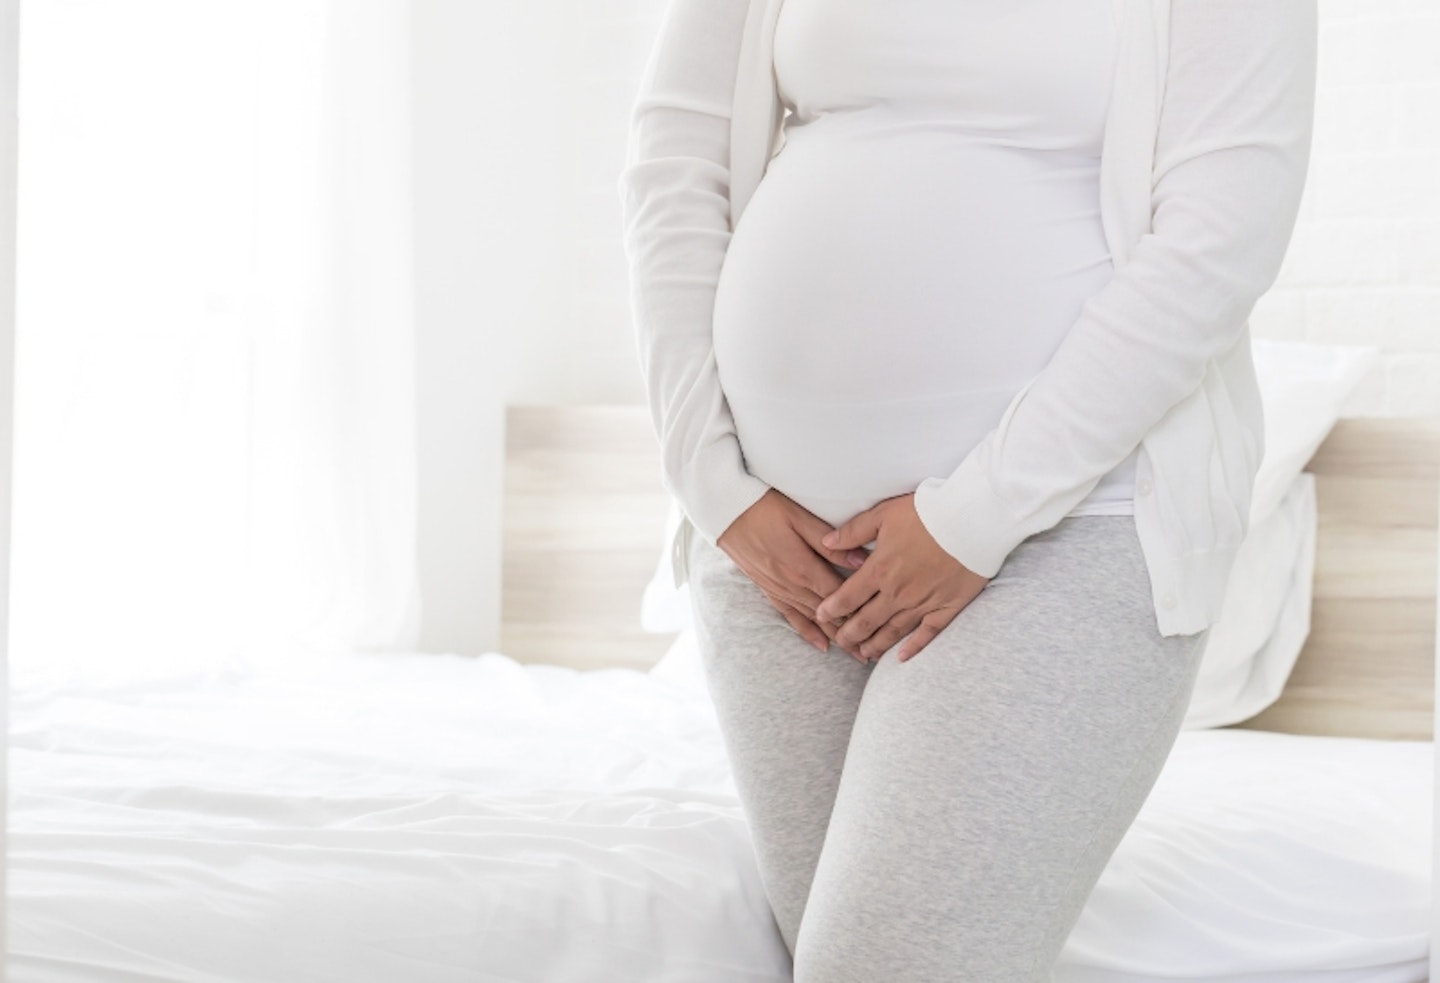 Frequent urination pregnancy: What it means and what to do about it